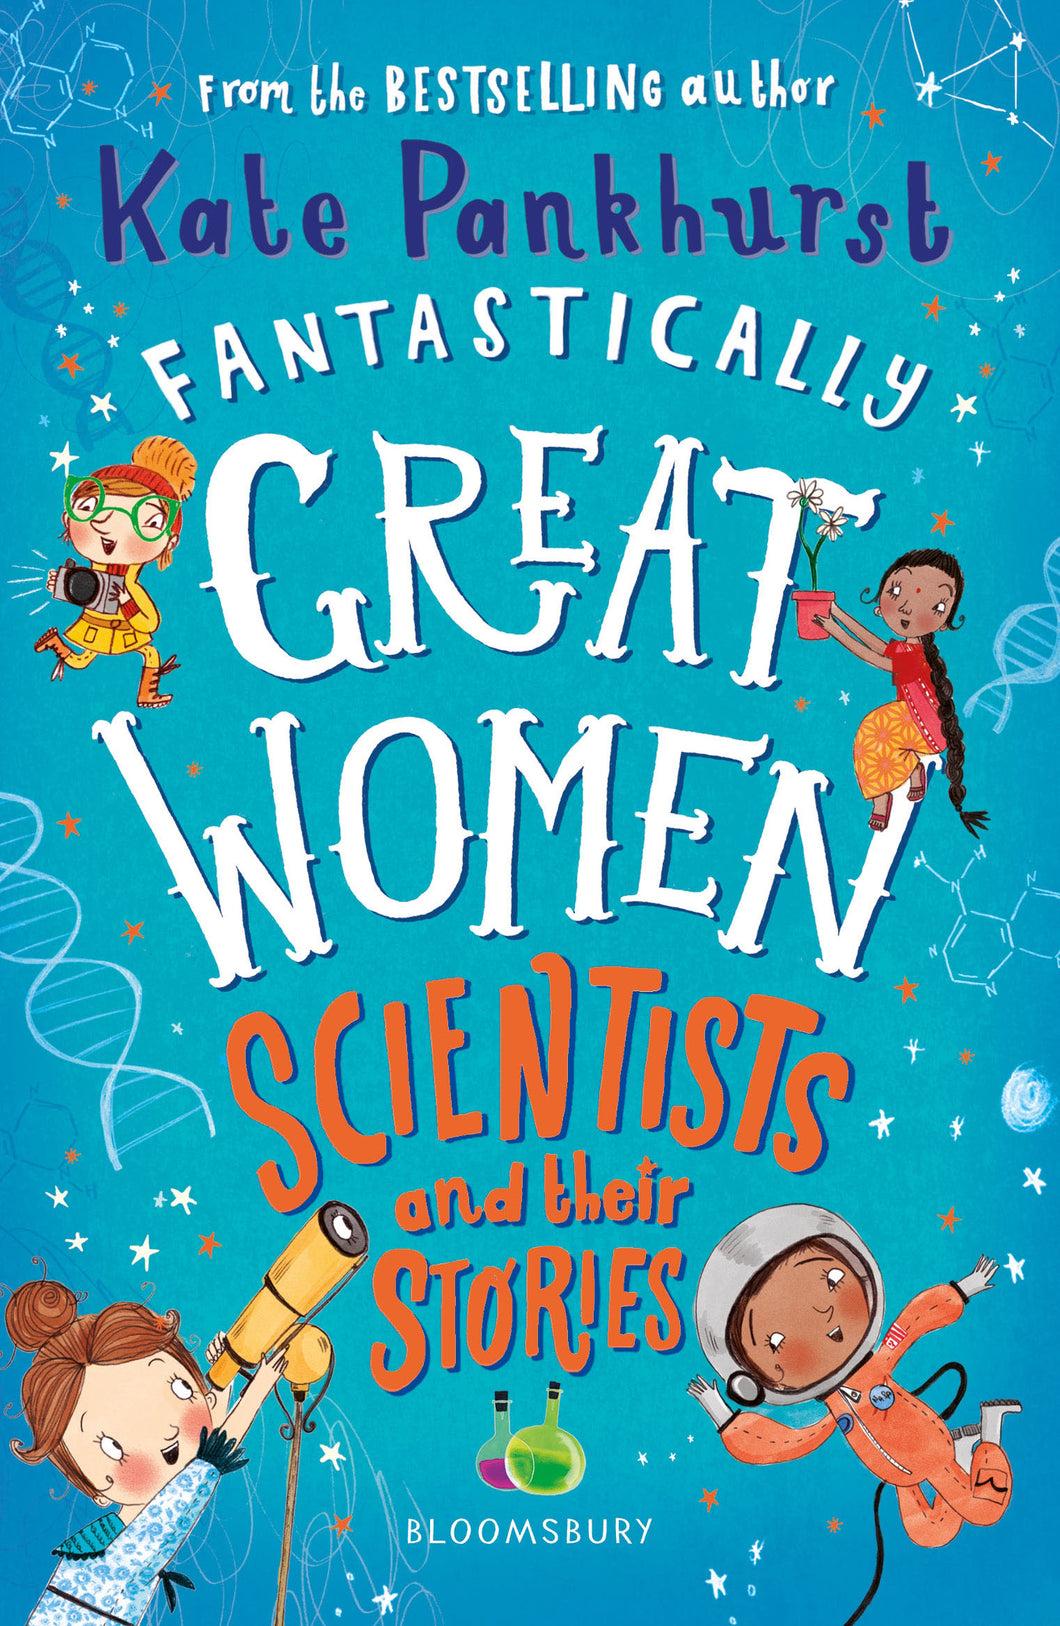 Book cover is blue with illustrations of female scientists (2 light-skinned women, two medium-skinned women) doing different activities.